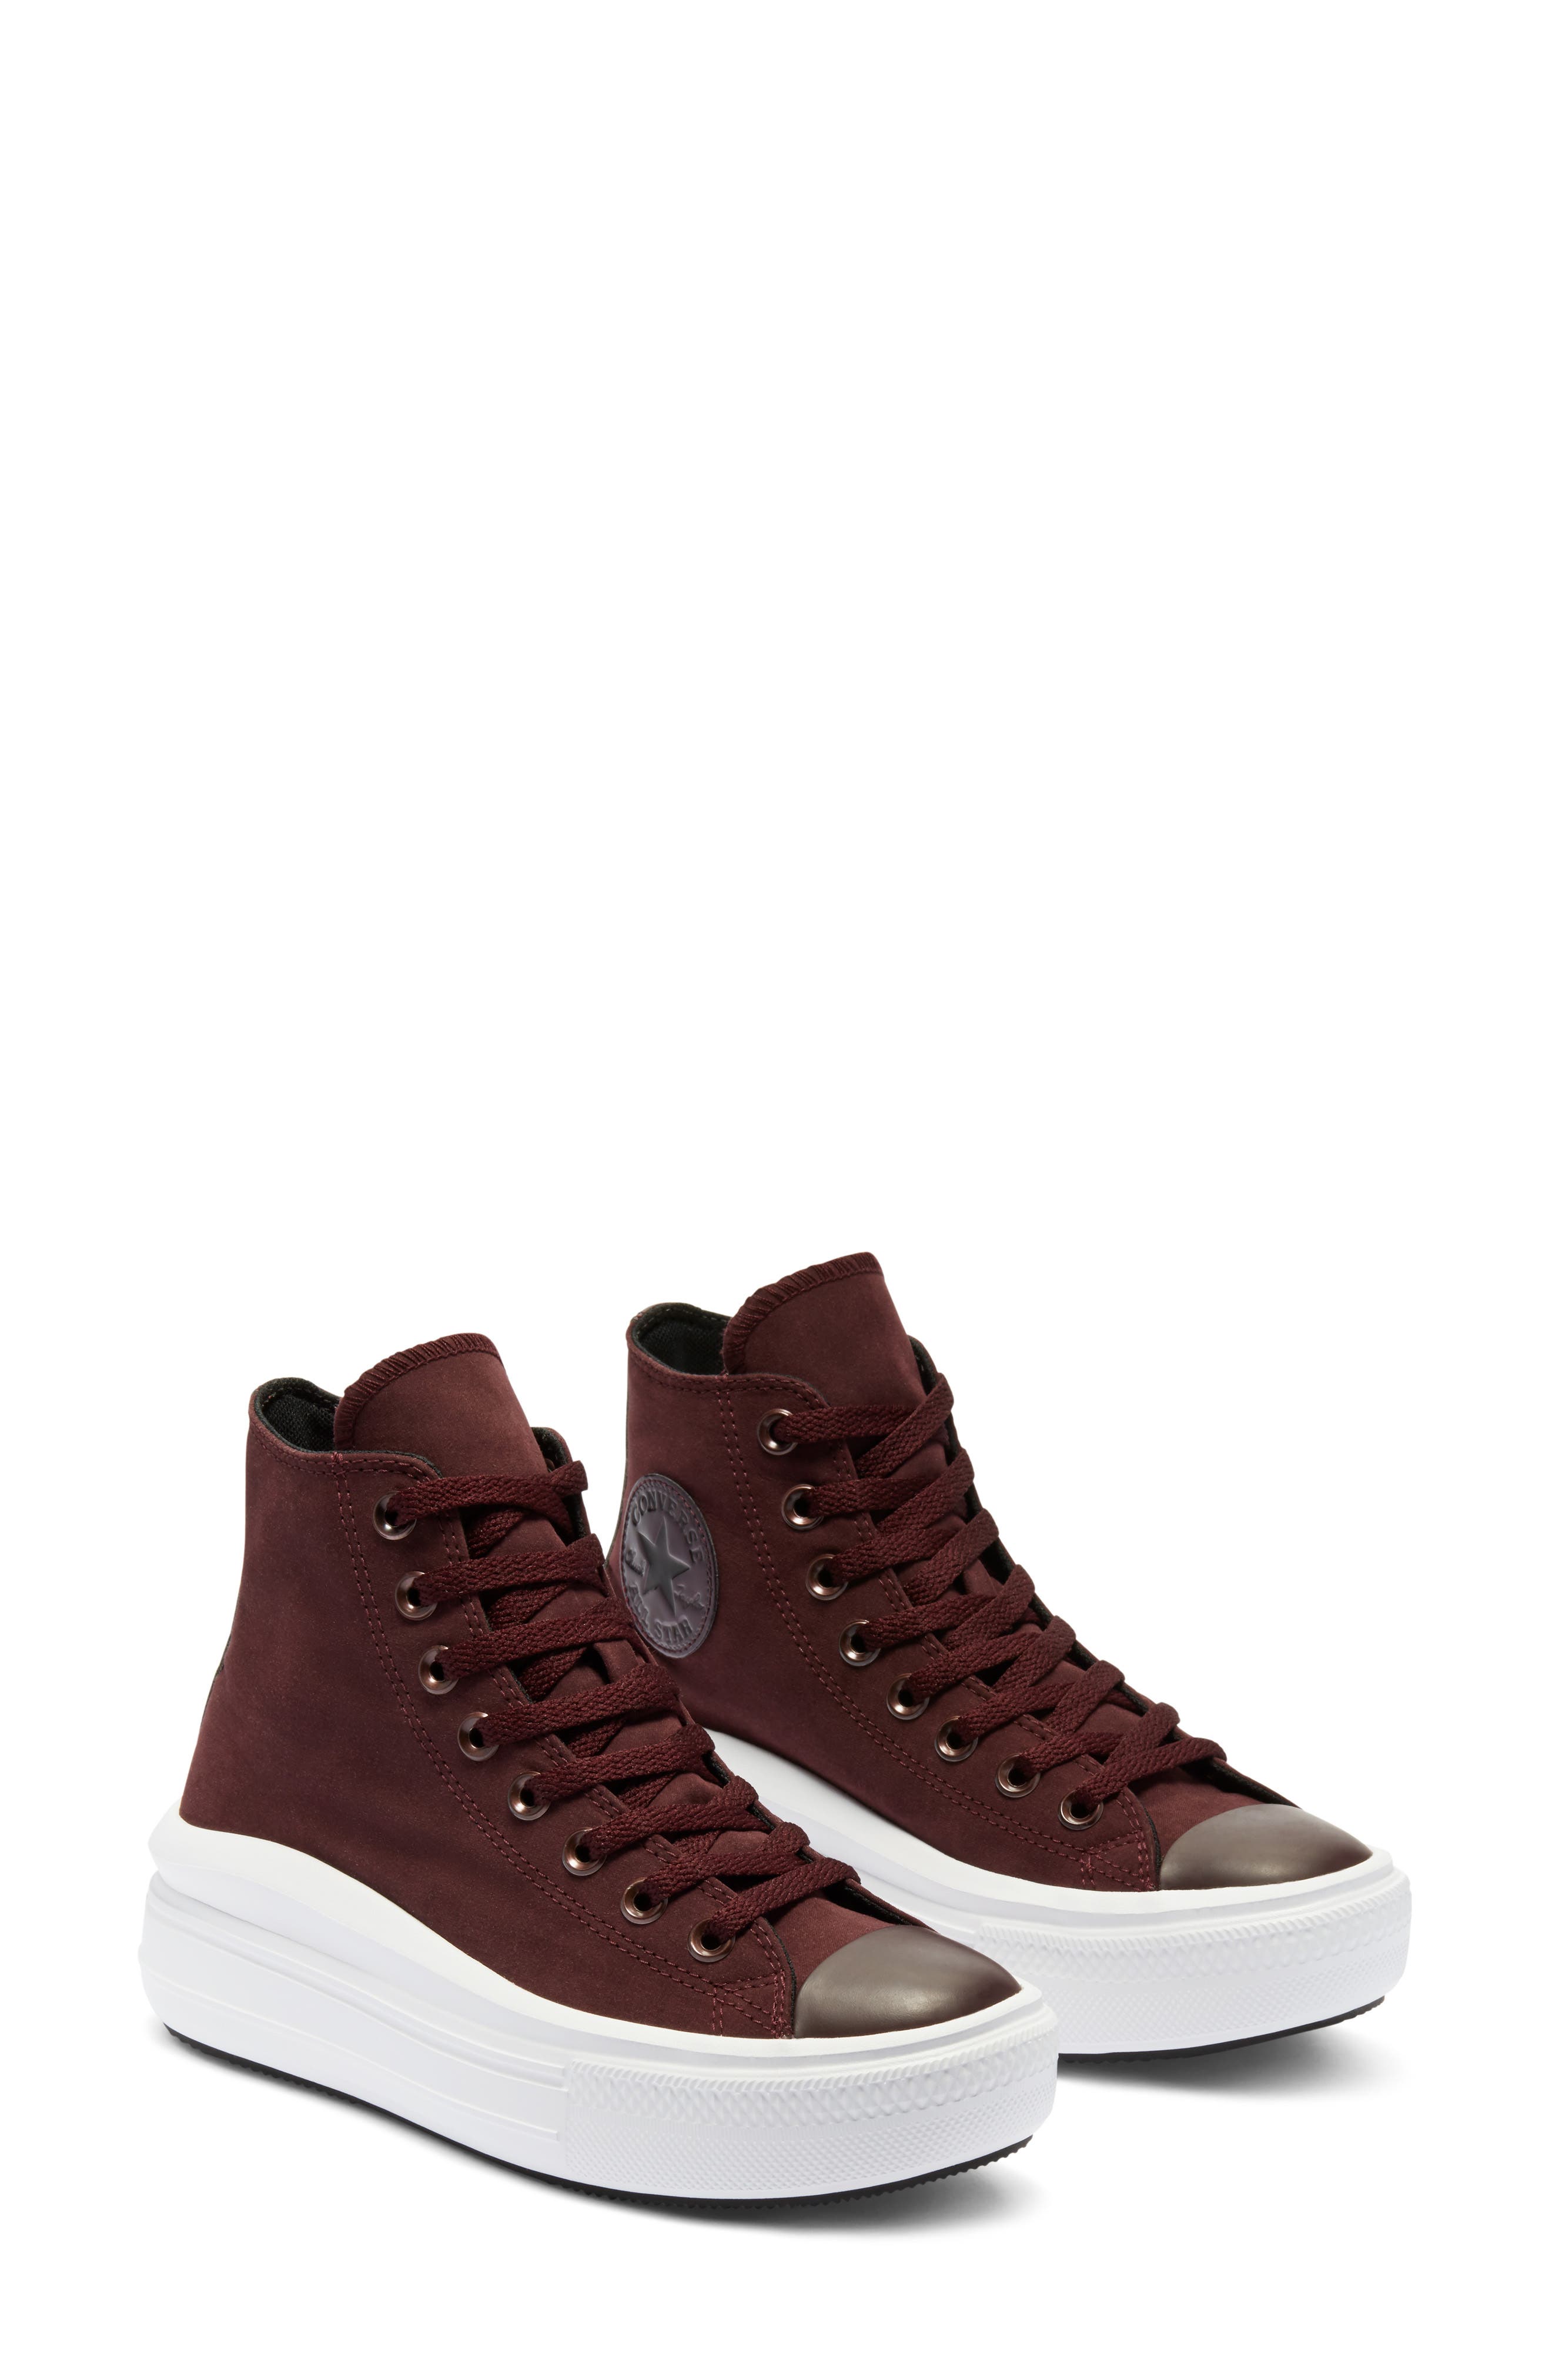 converse leather platform sneakers